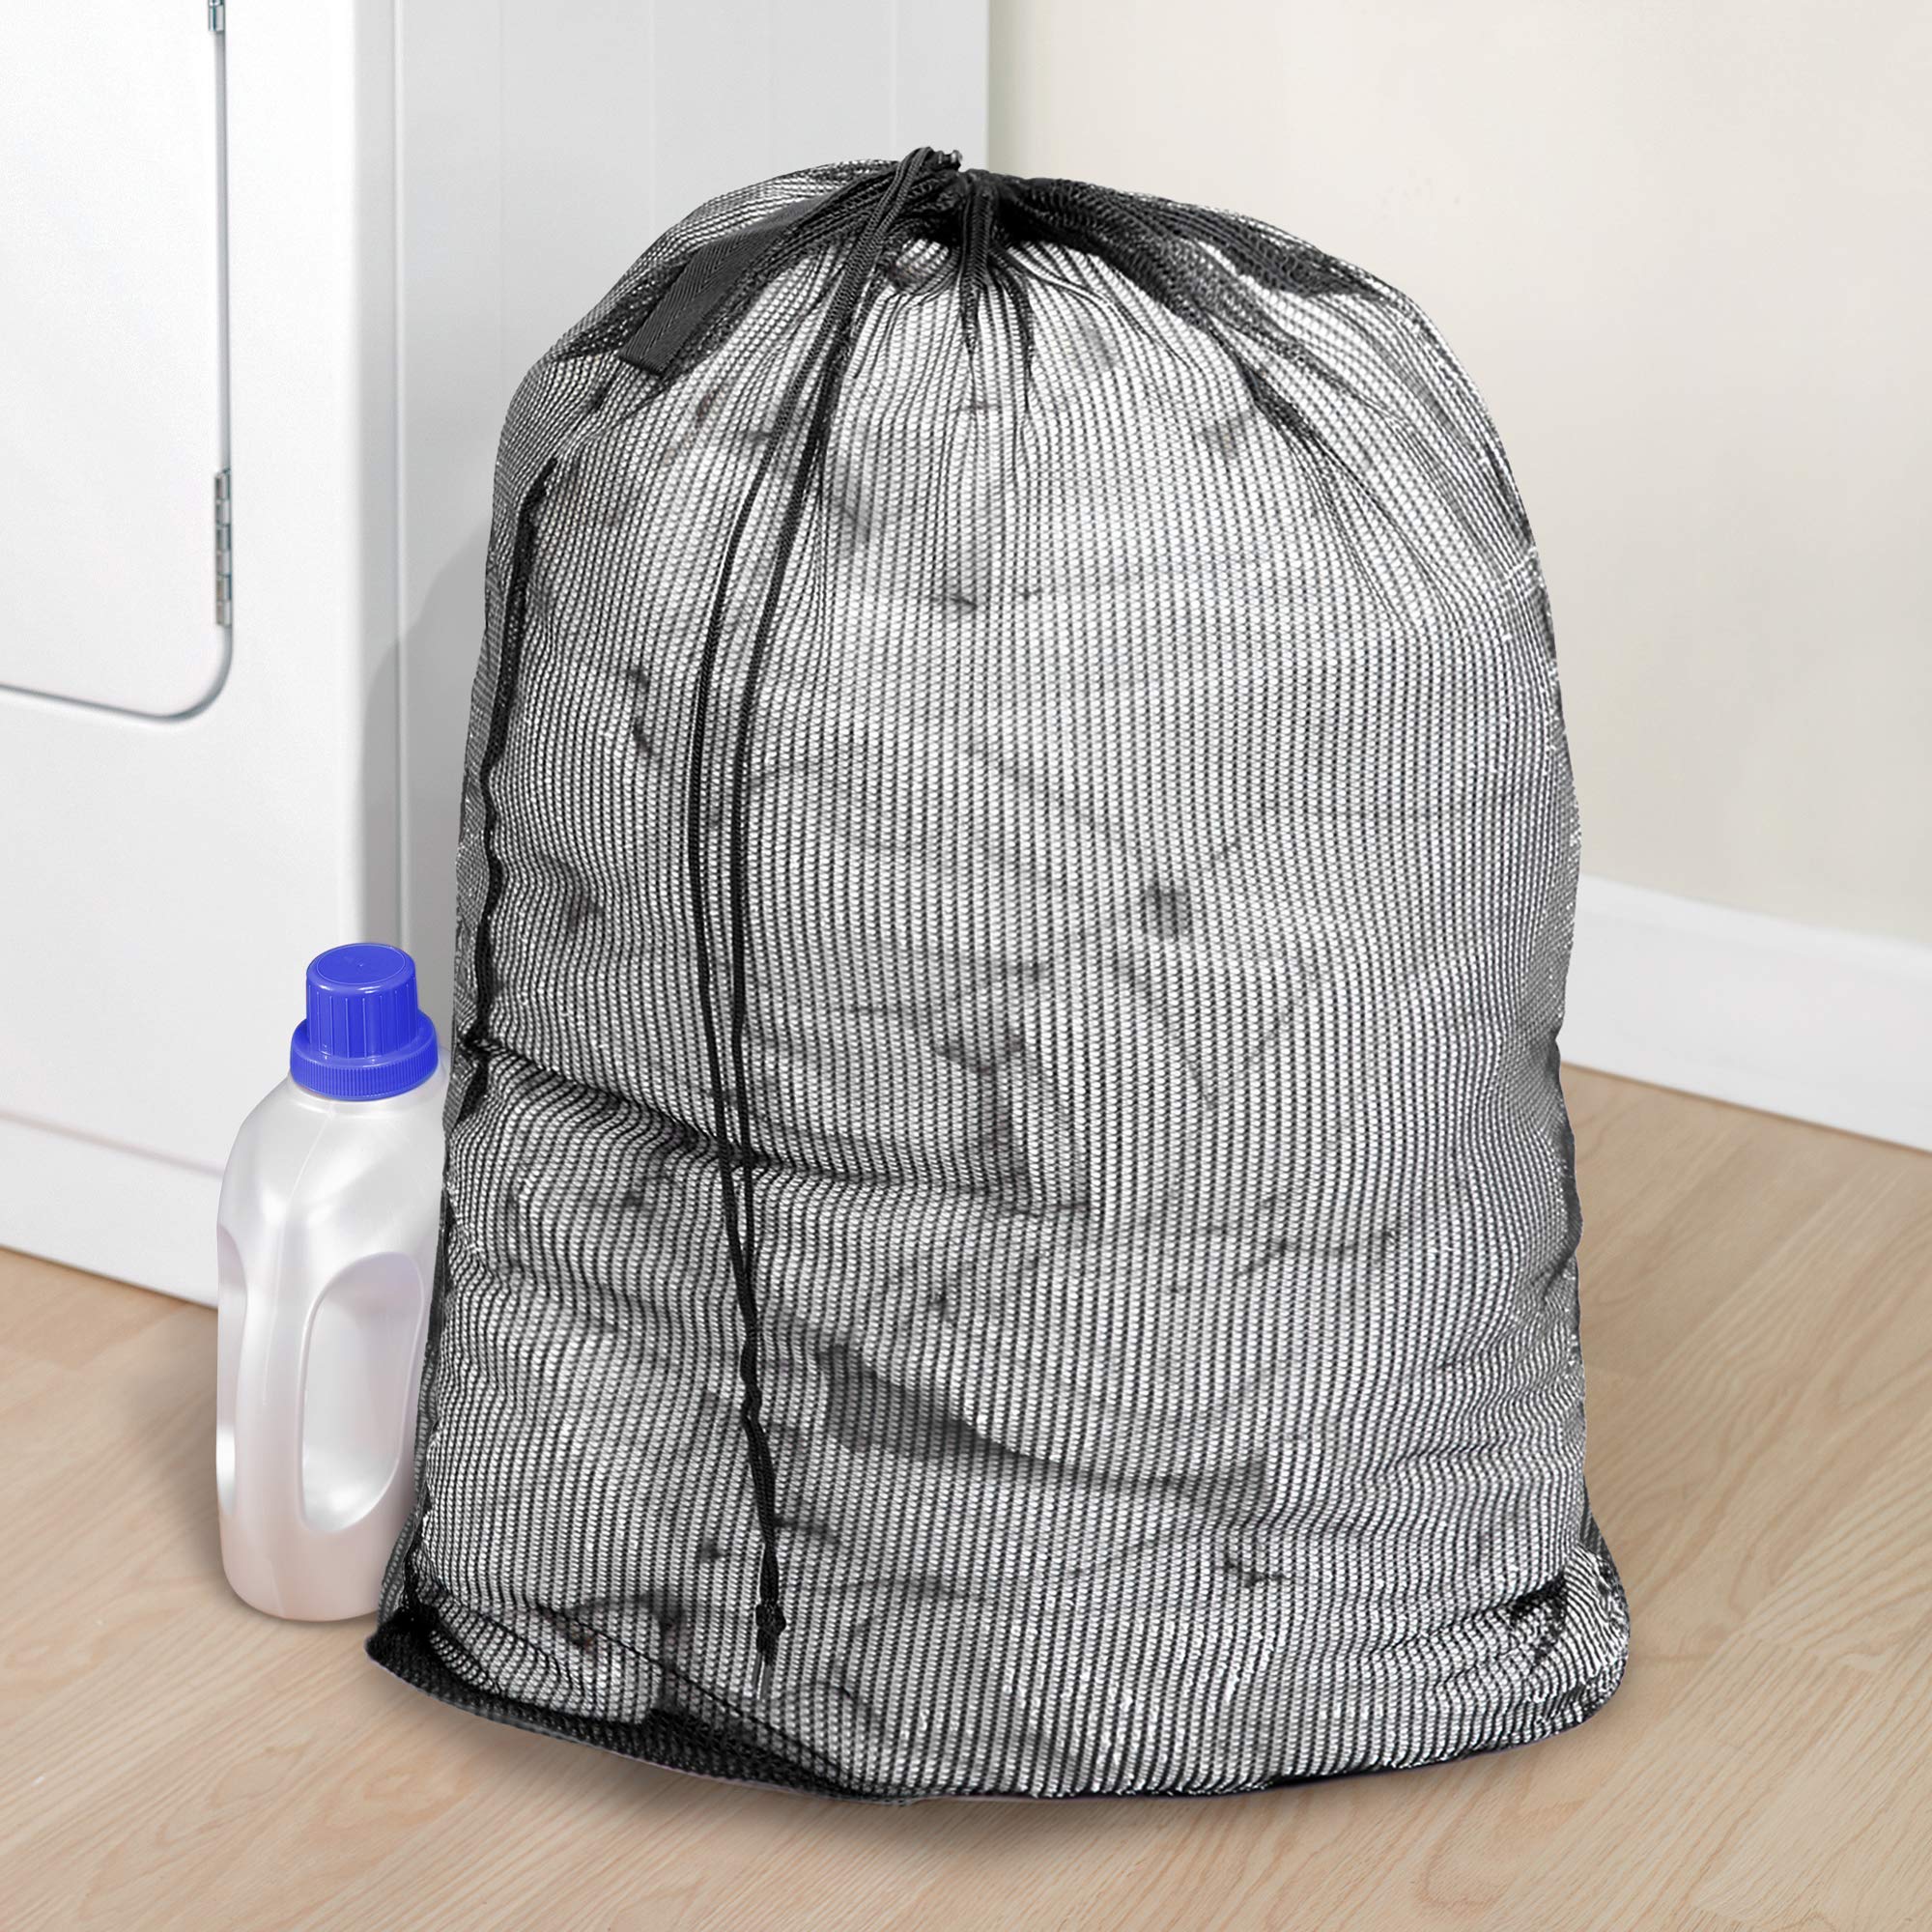 Mesh Laundry Bag with Handle and Push Lock Drawstring - Multiple Options - Smart Design® 17